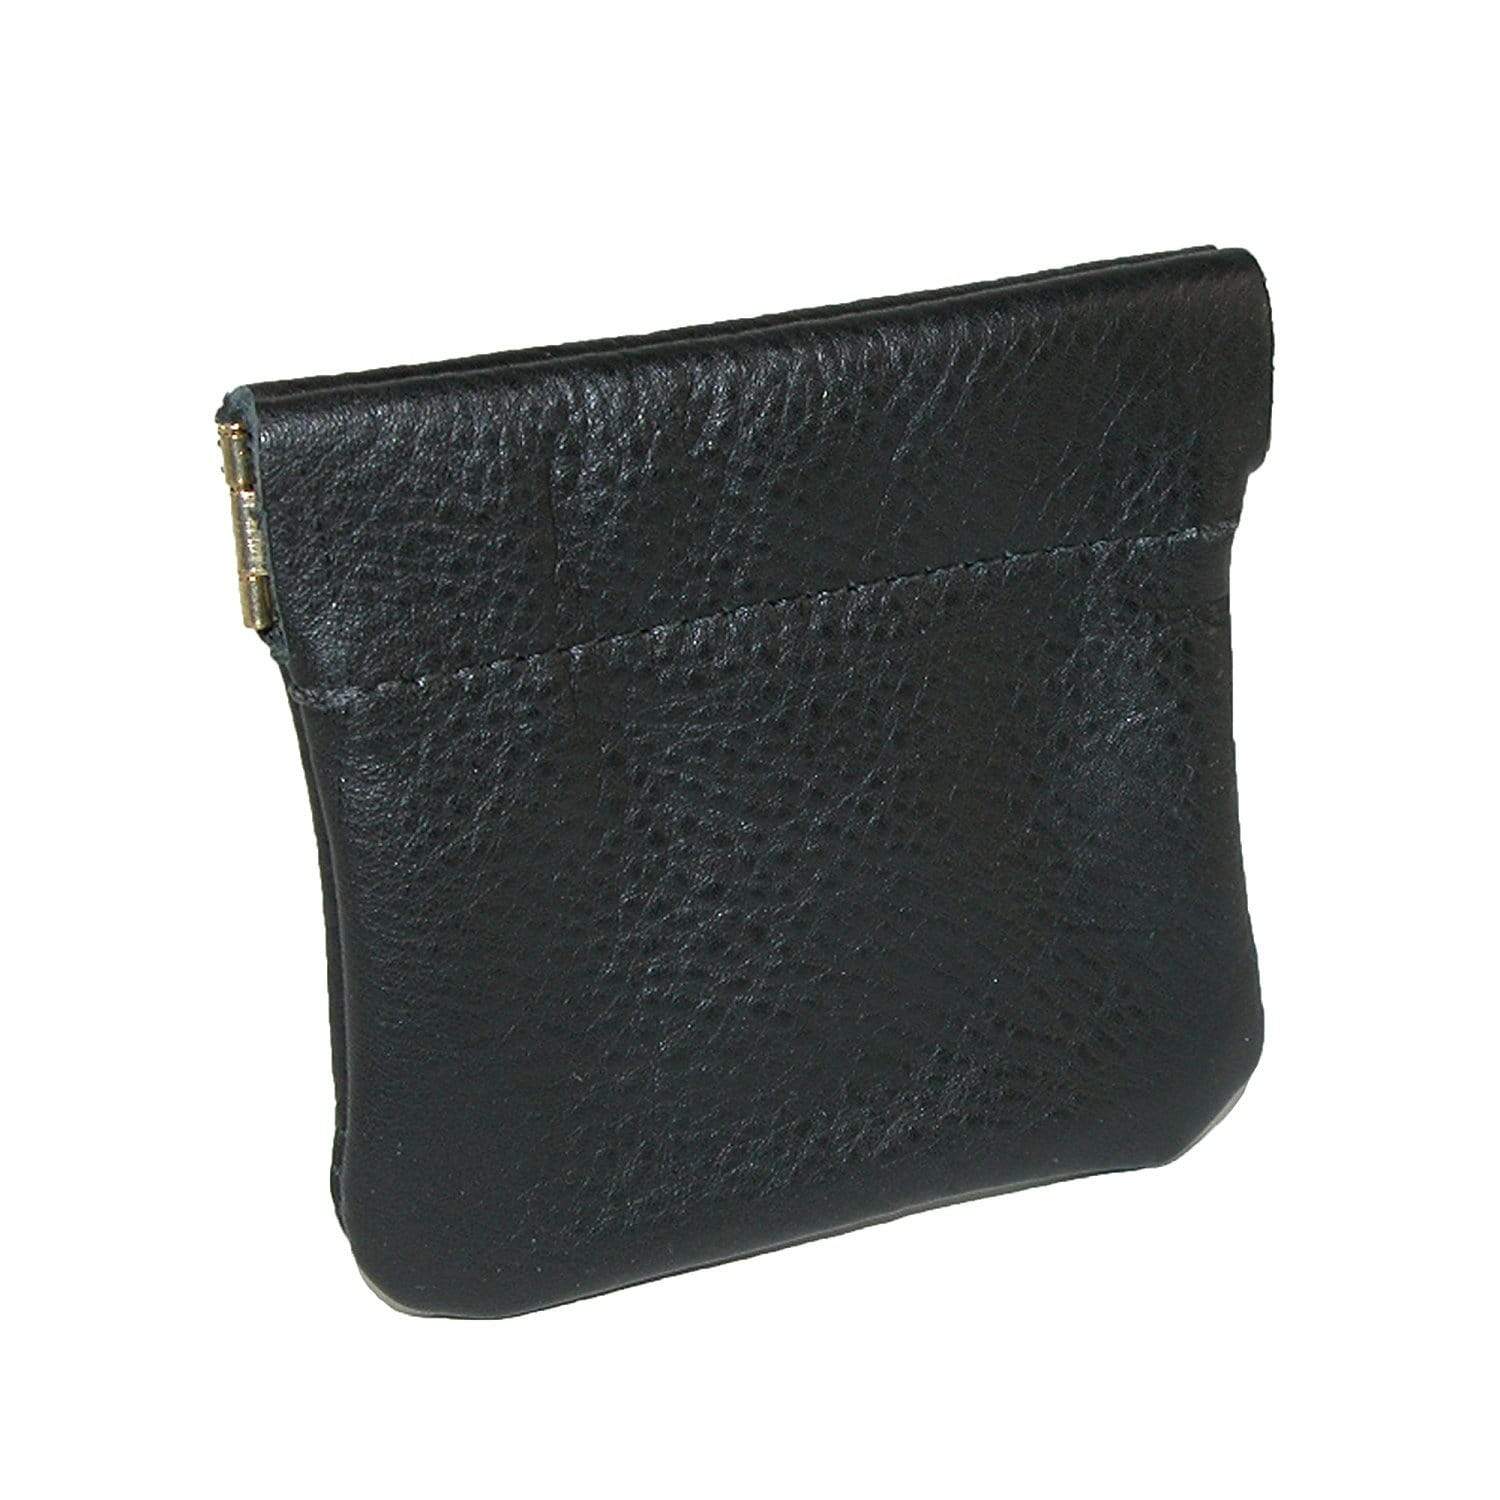 Leather Coin Pouch in Black Color